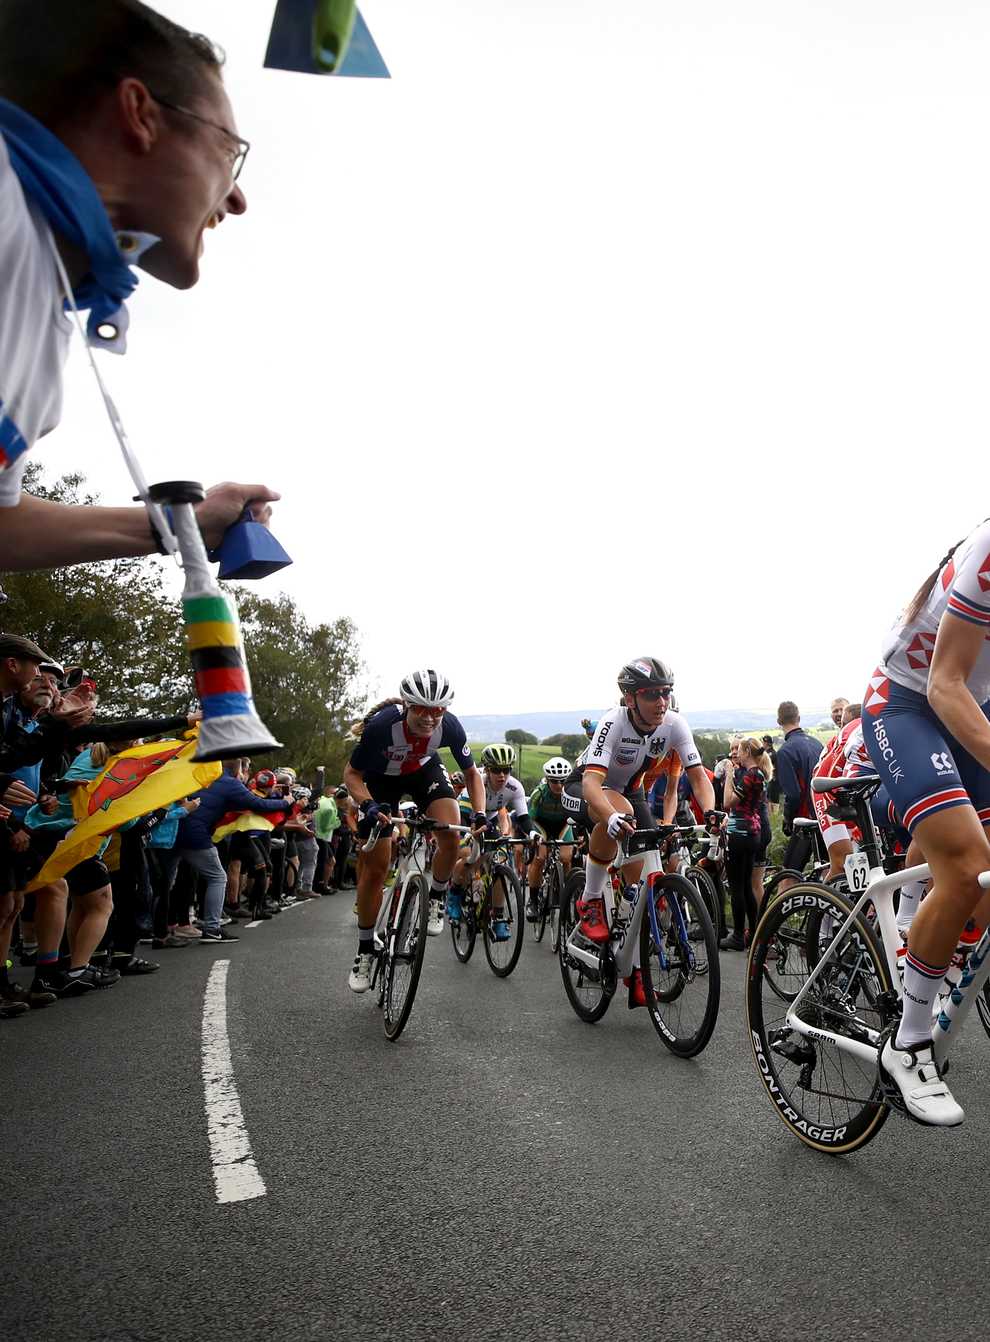 Lizzie Deignan racing in front of a home crowd at the 2019 Road Cycling World Championships in Yorkshire (PA Images)